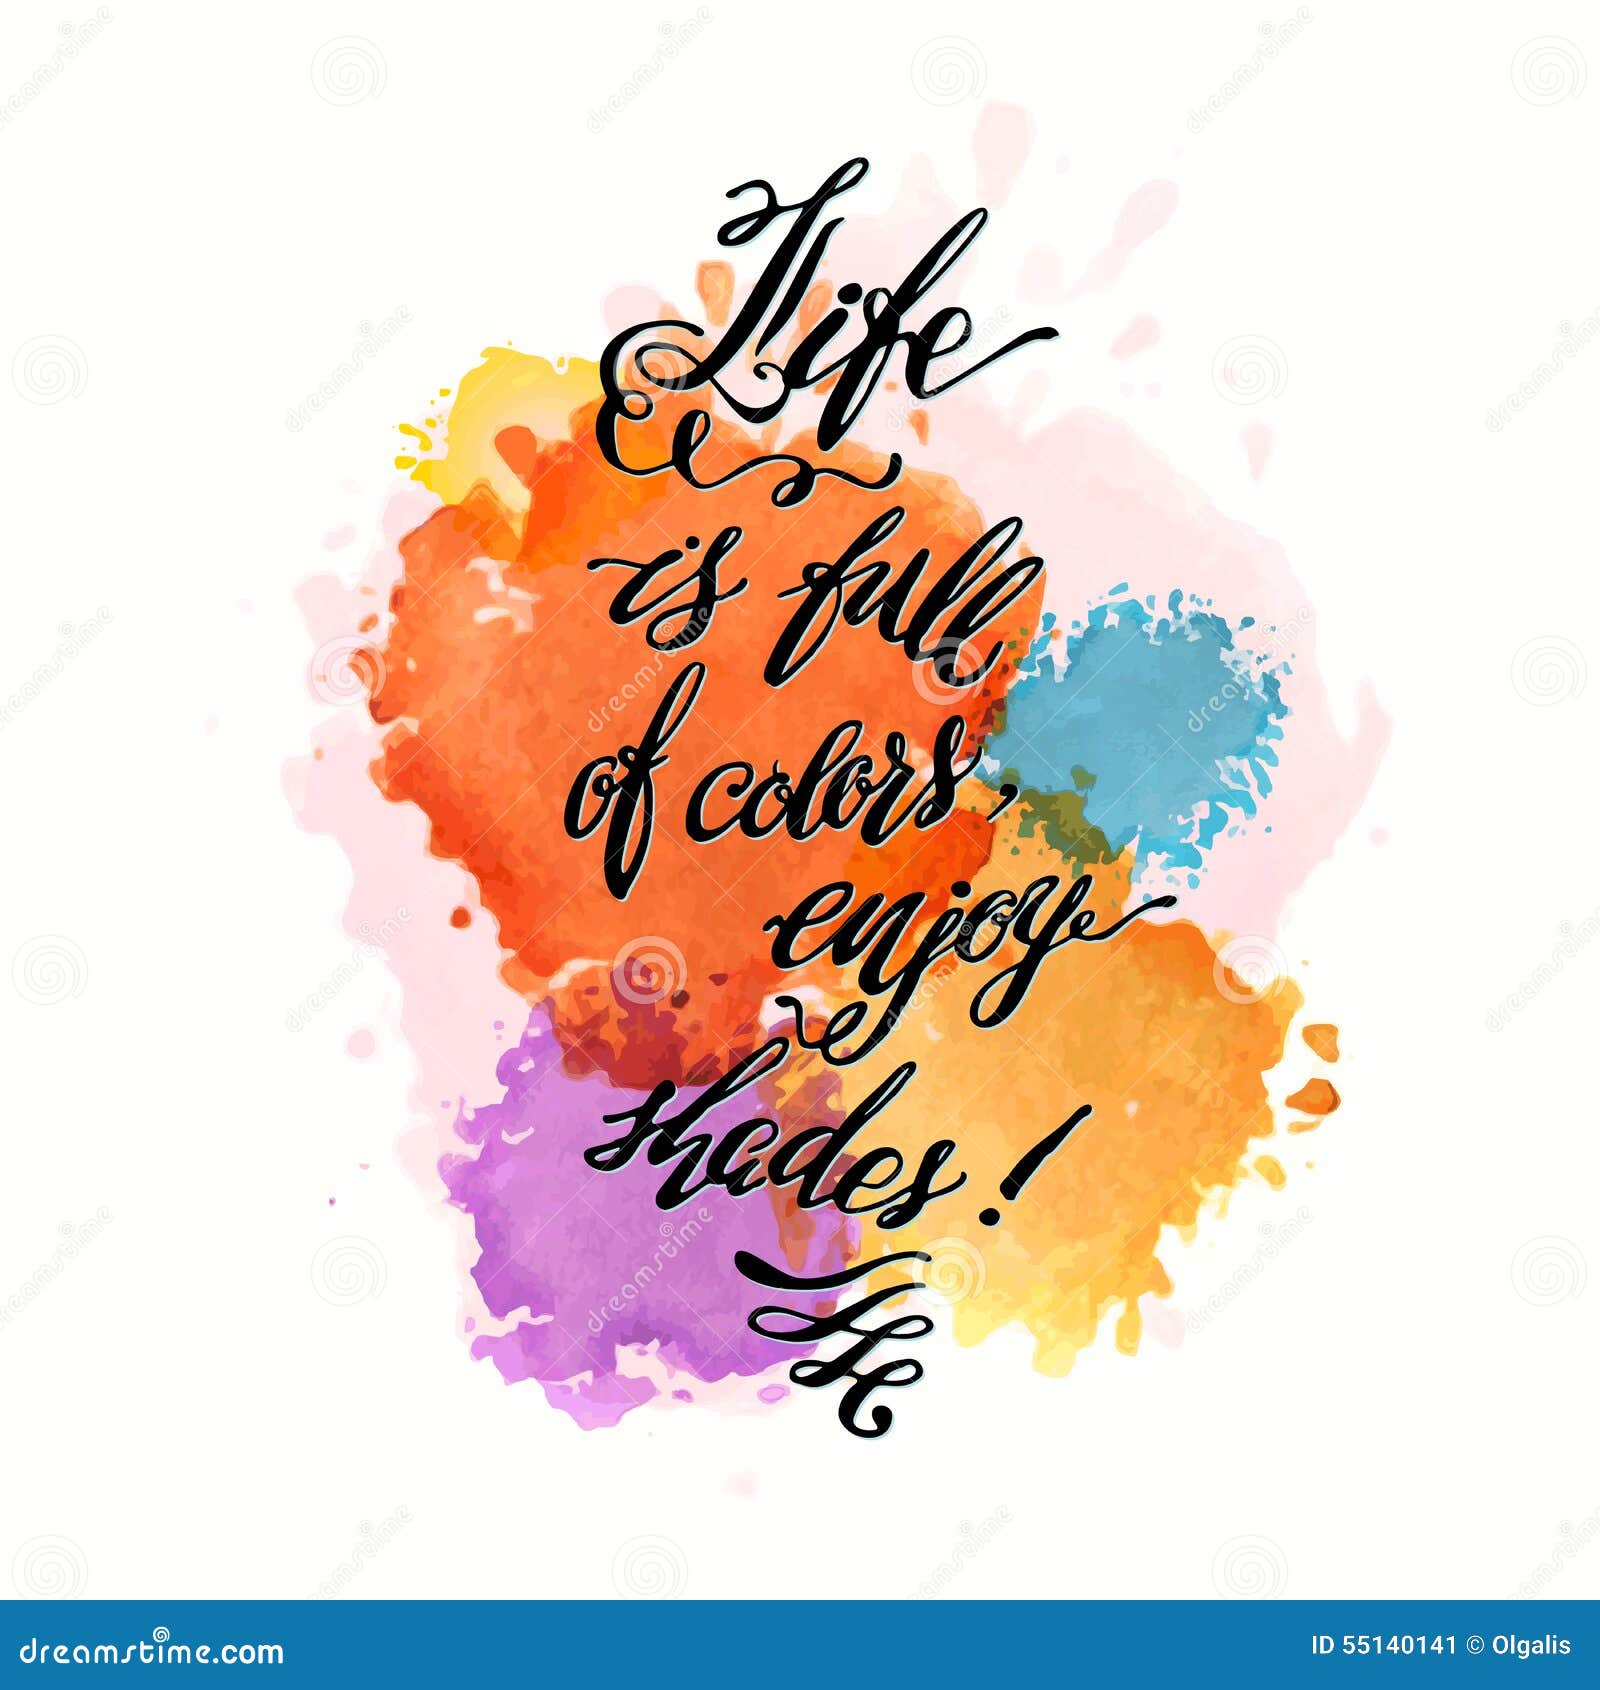 https://thumbs.dreamstime.com/z/calligraphic-hand-drawn-watercolor-lettering-vector-poster-life-full-colors-enjoy-shades-inscription-phrase-inspiration-55140141.jpg